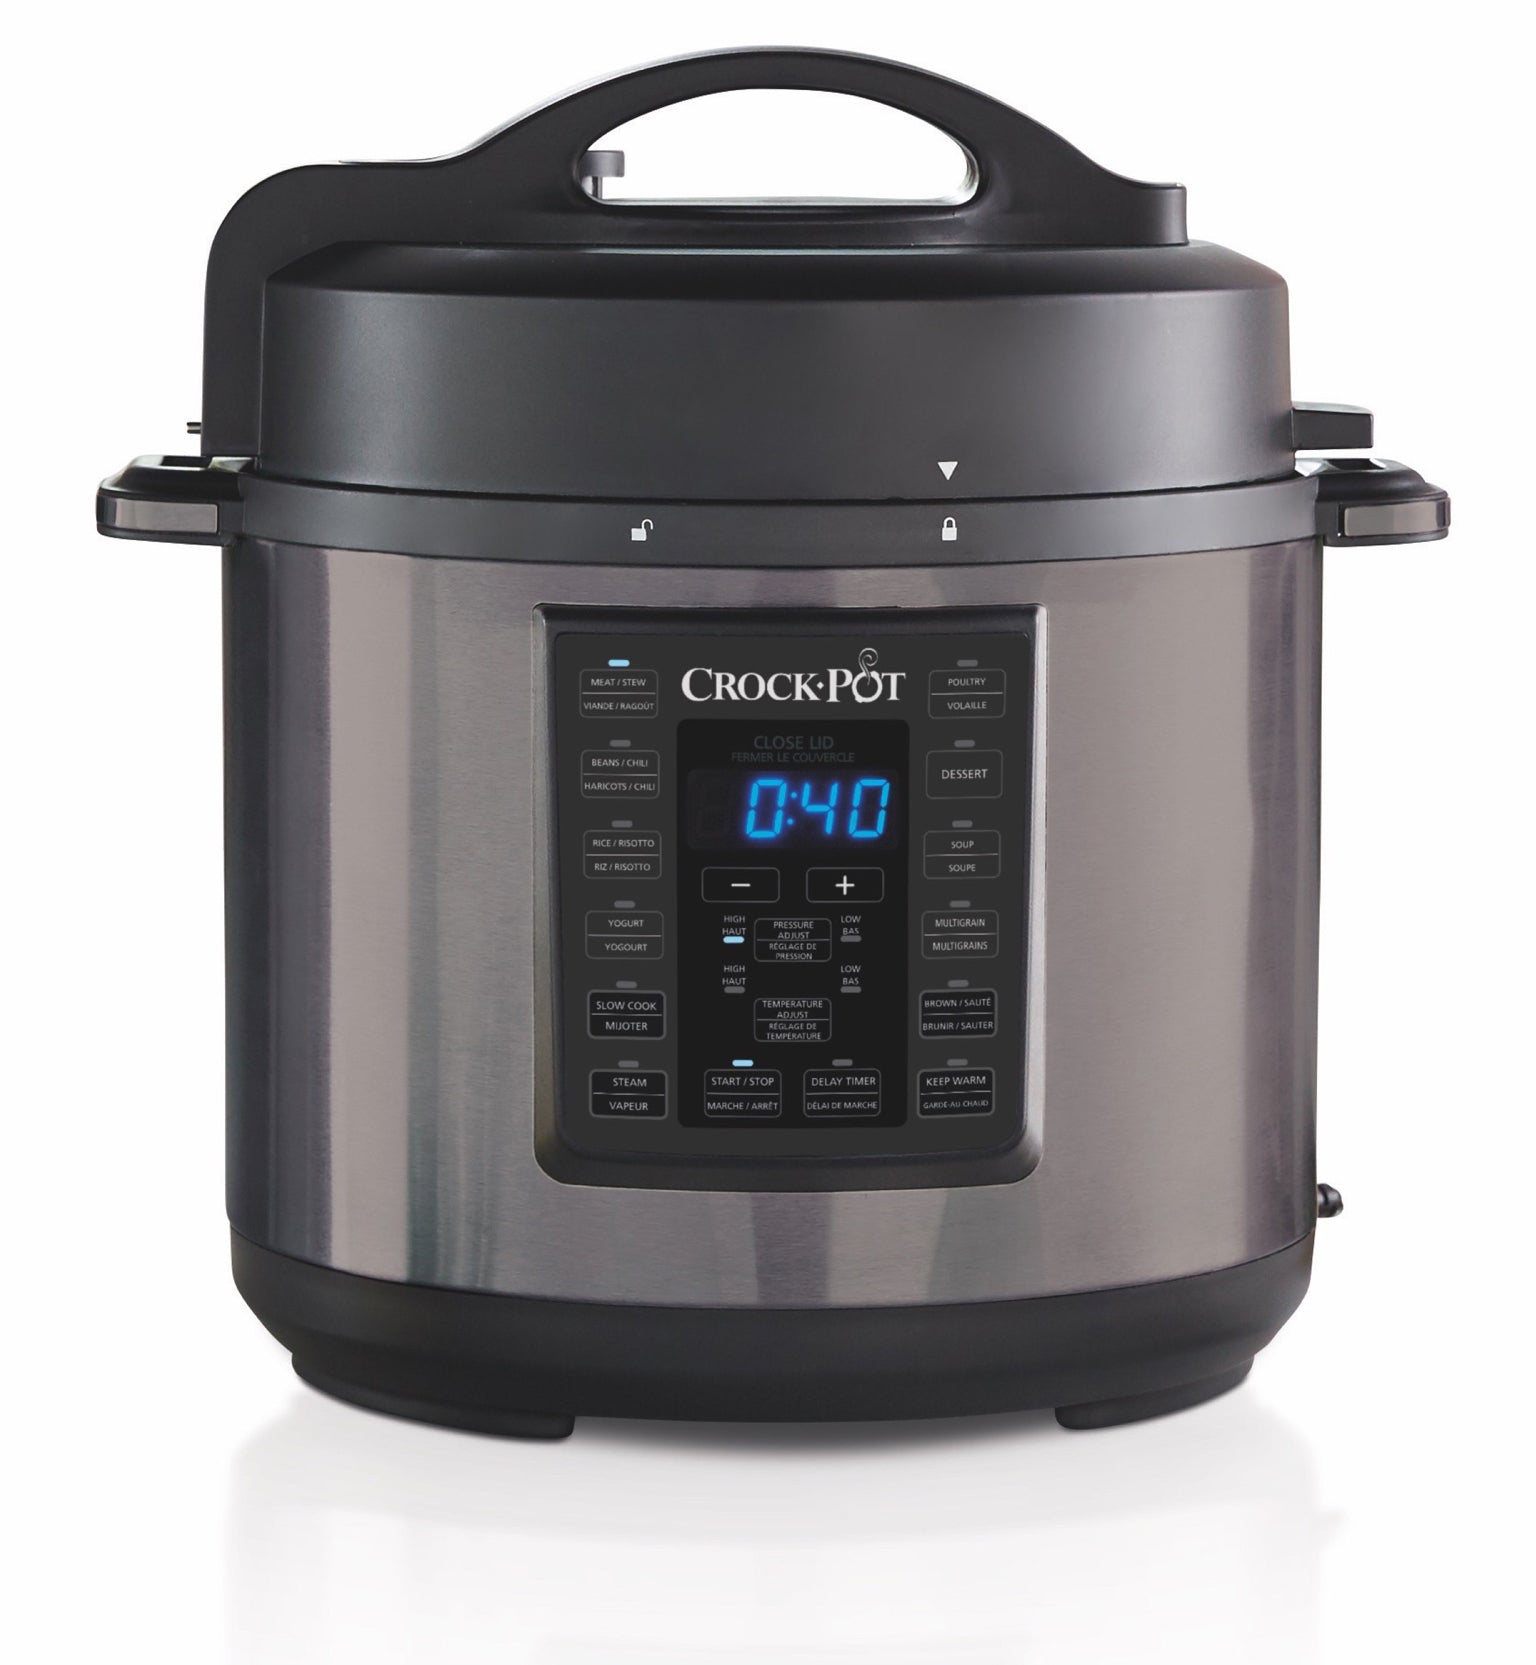 Crock-pot - 8-qt. Express Crock Programmable Slow Cooker And Pressure  Cooker Wit, Cookers & Steamers, Furniture & Appliances